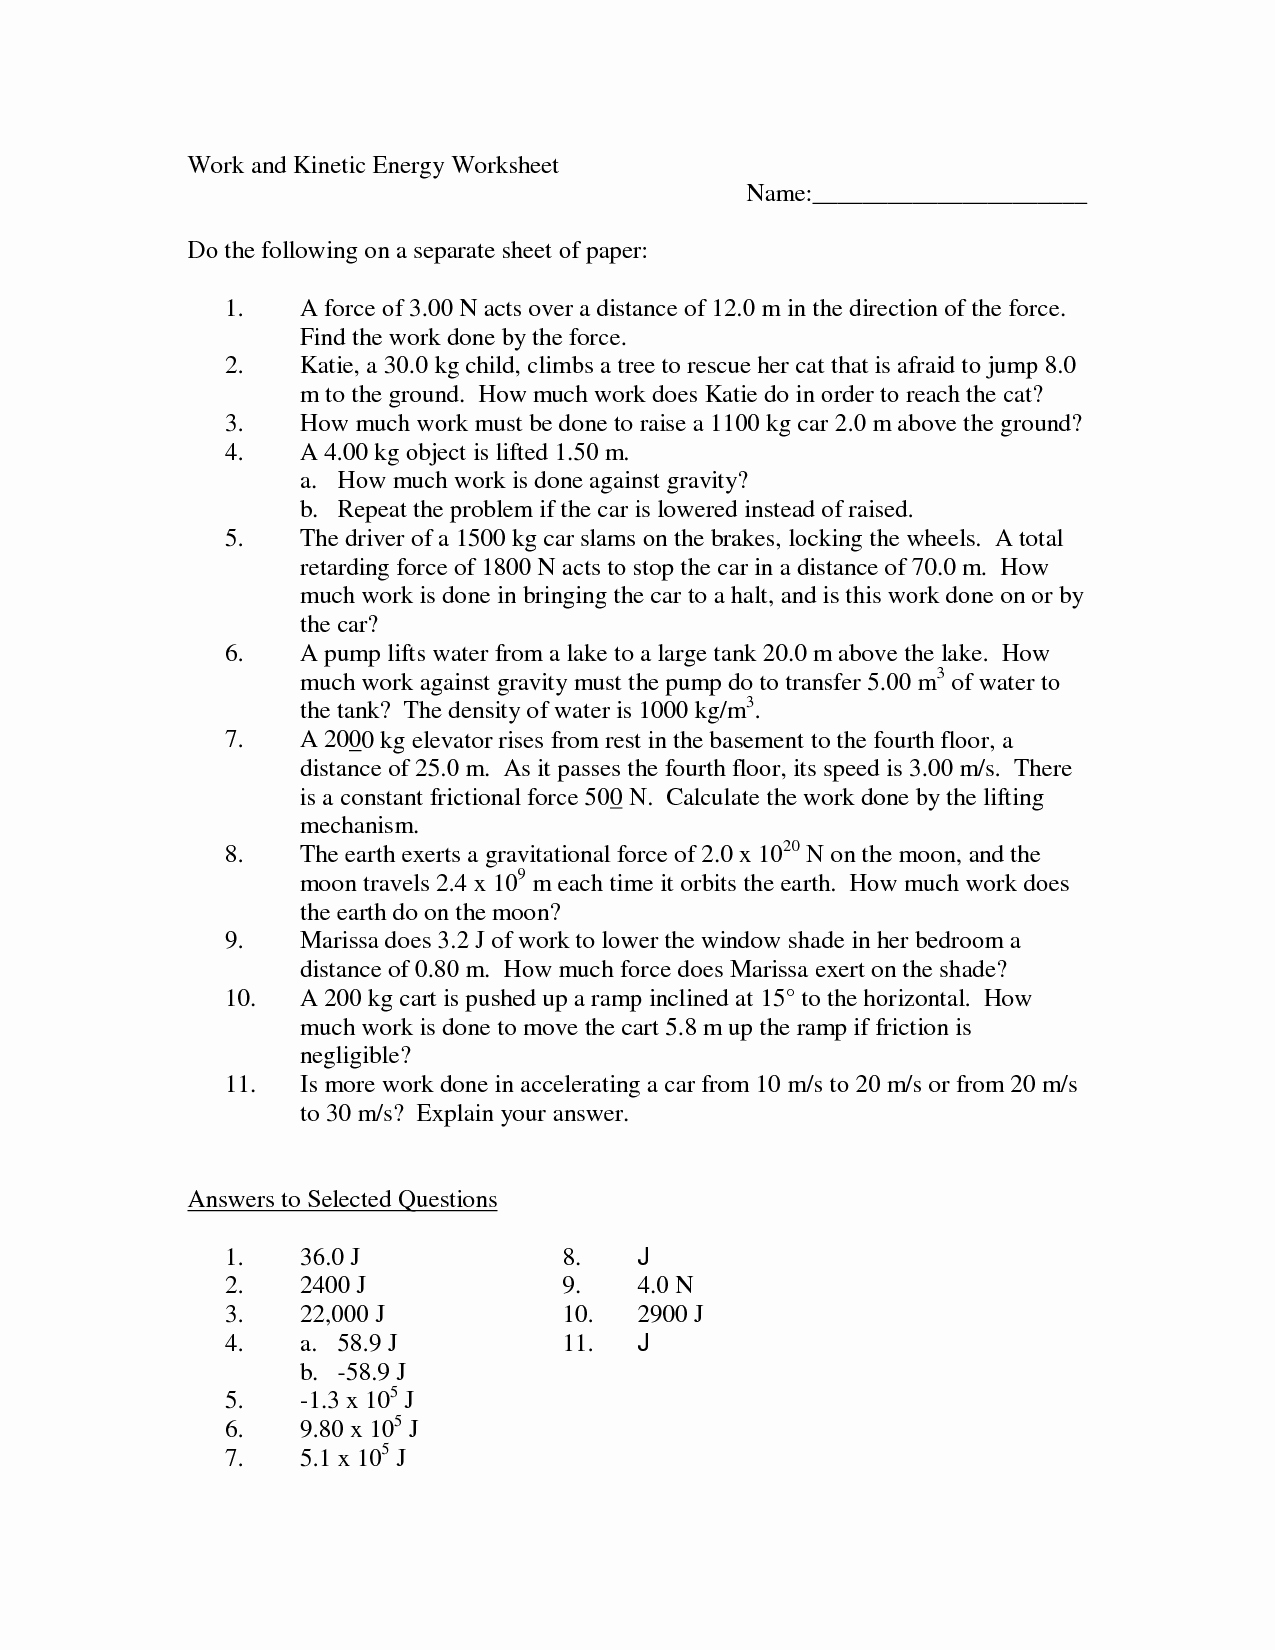 Work and Energy Worksheet Answers Luxury 7 Best Of Work and Energy Worksheet 1 Potential